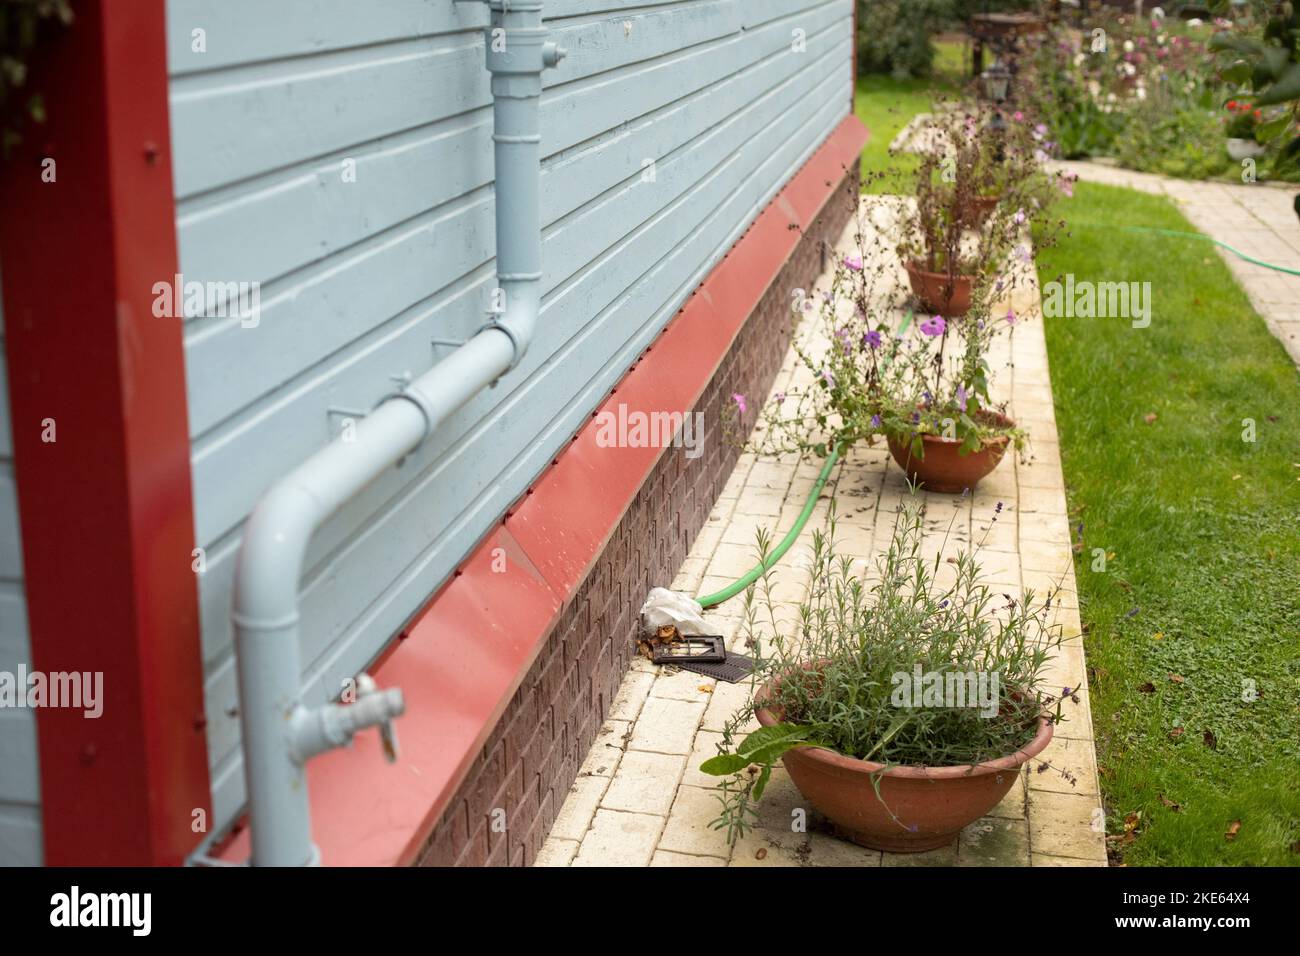 Flowers in pots near wall of house. Landscape design in yard. Details of building. Wall of boards. Cornice from rain. Stock Photo